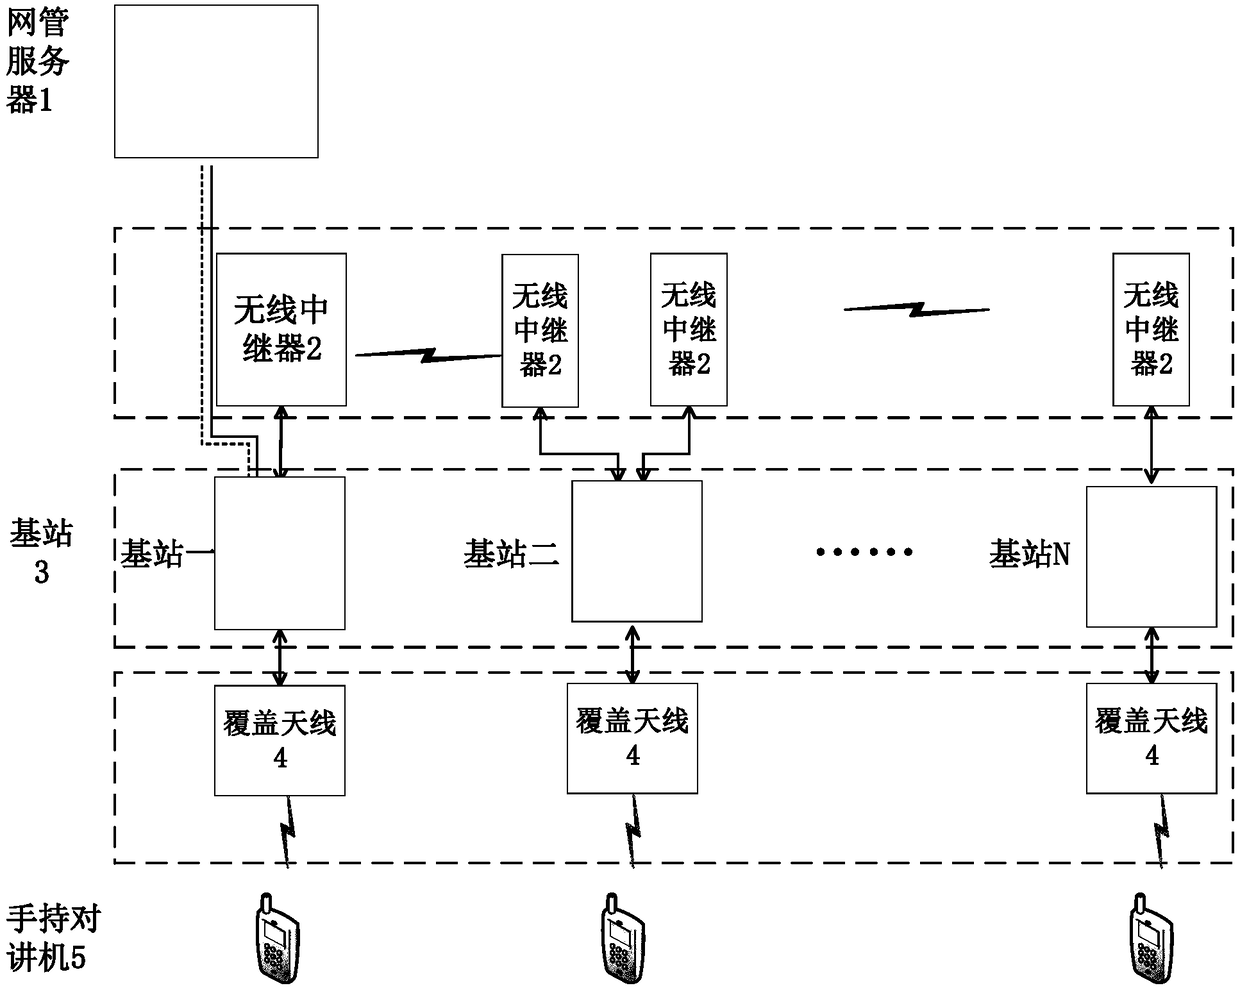 Railway section wireless networking intercom system with network management function and application thereof